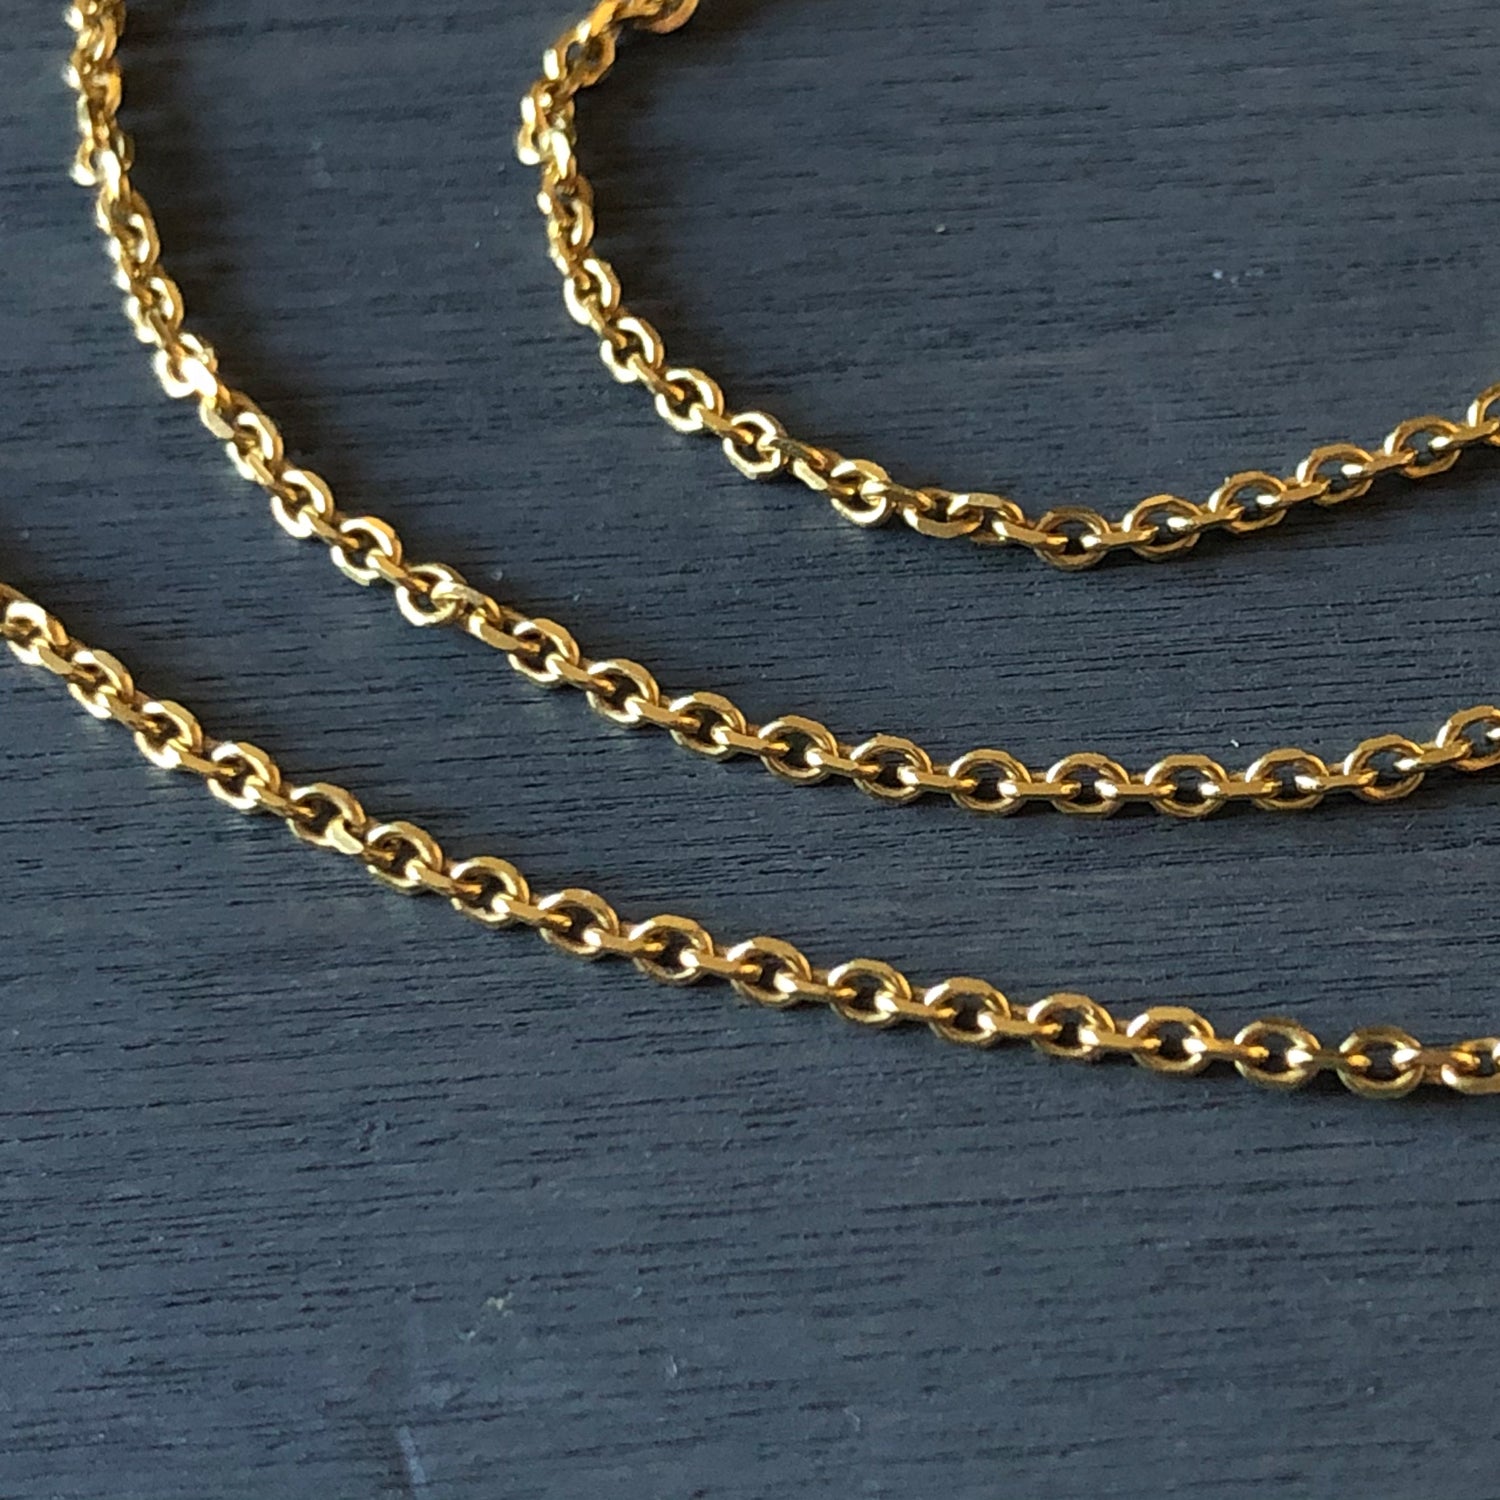 BOHEME GOLD CABLE LINK CHAIN 26" rts